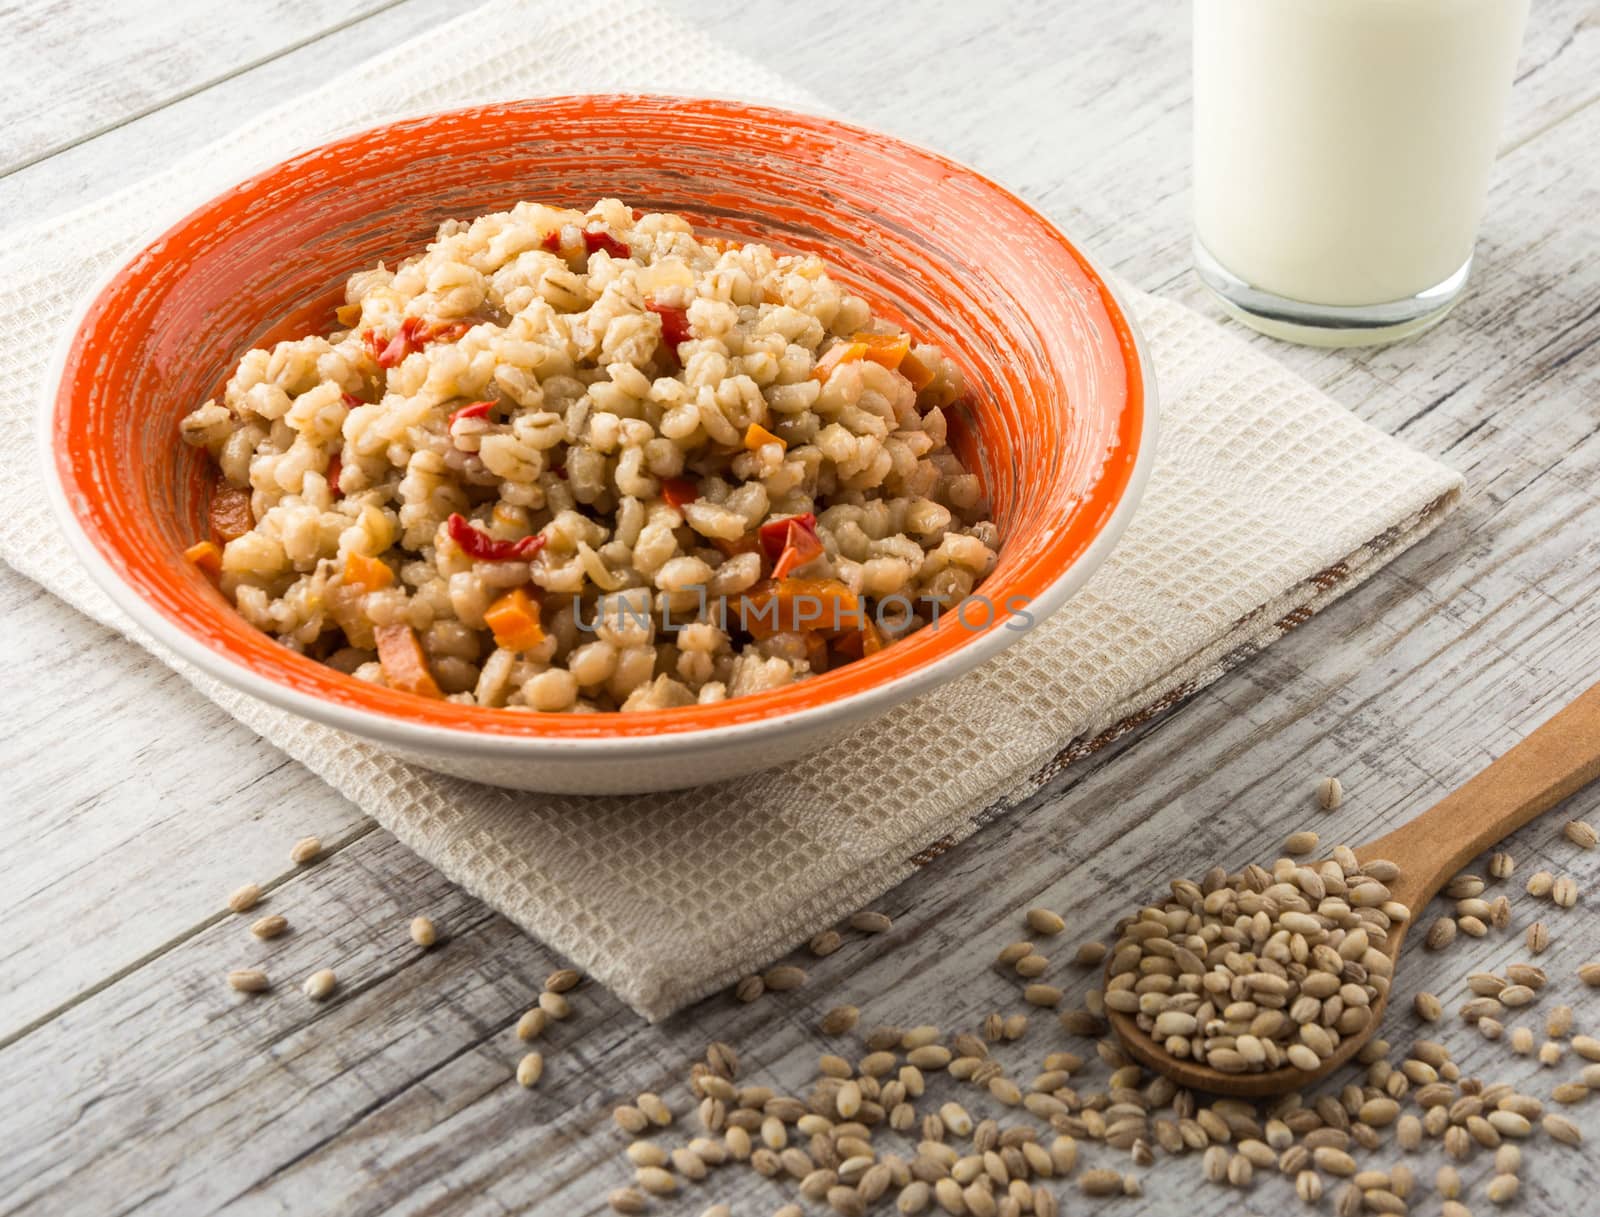 Pearl barley porridge with vegetables in an orange ceramic plate with a kitchen towel, pearl barley in a wooden spoon and glass of milk on a white wooden table